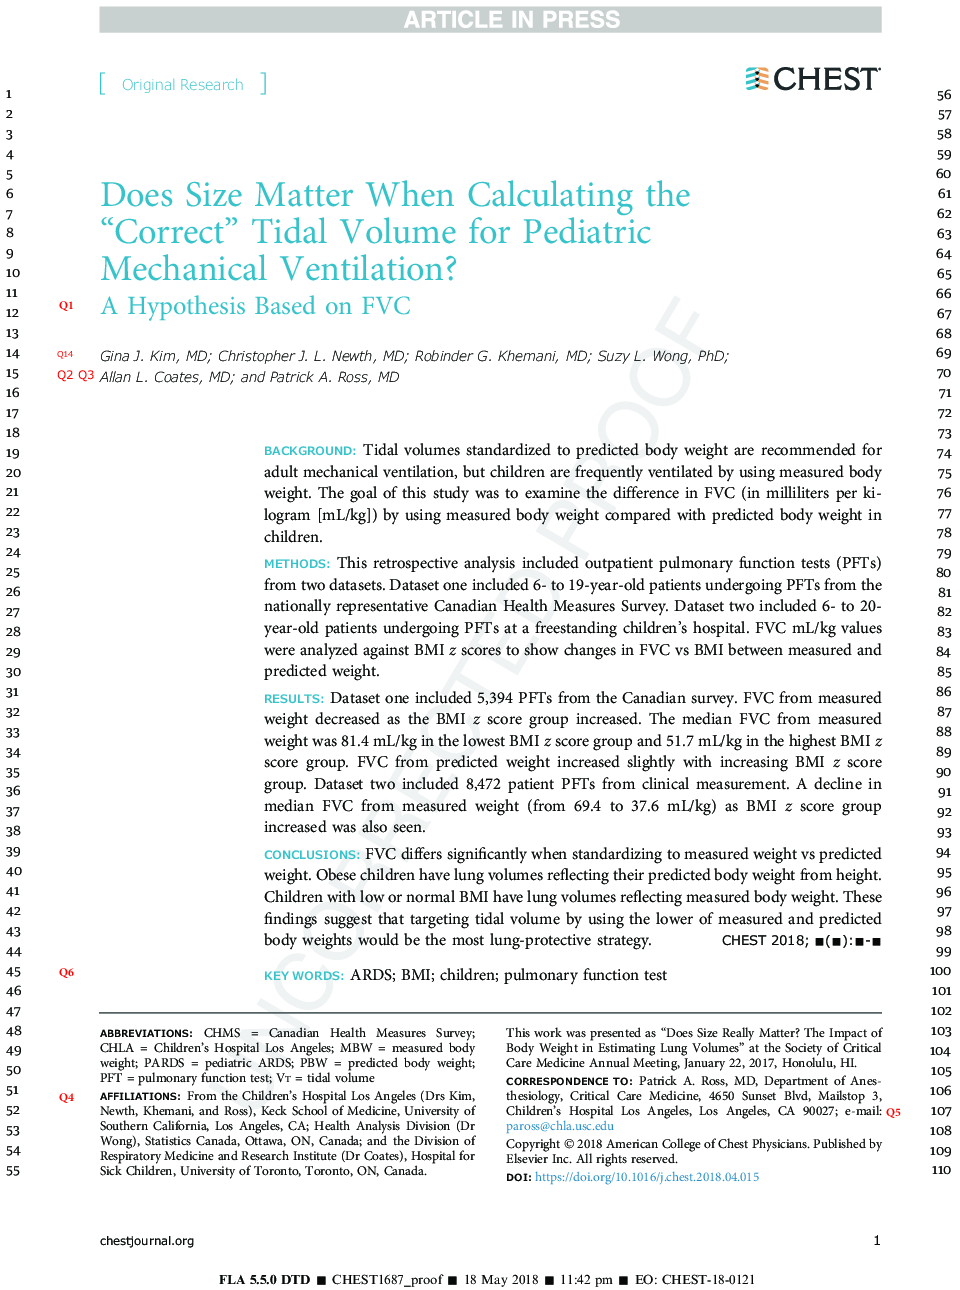 Does Size Matter When Calculating the “Correct” Tidal Volume for Pediatric Mechanical Ventilation?